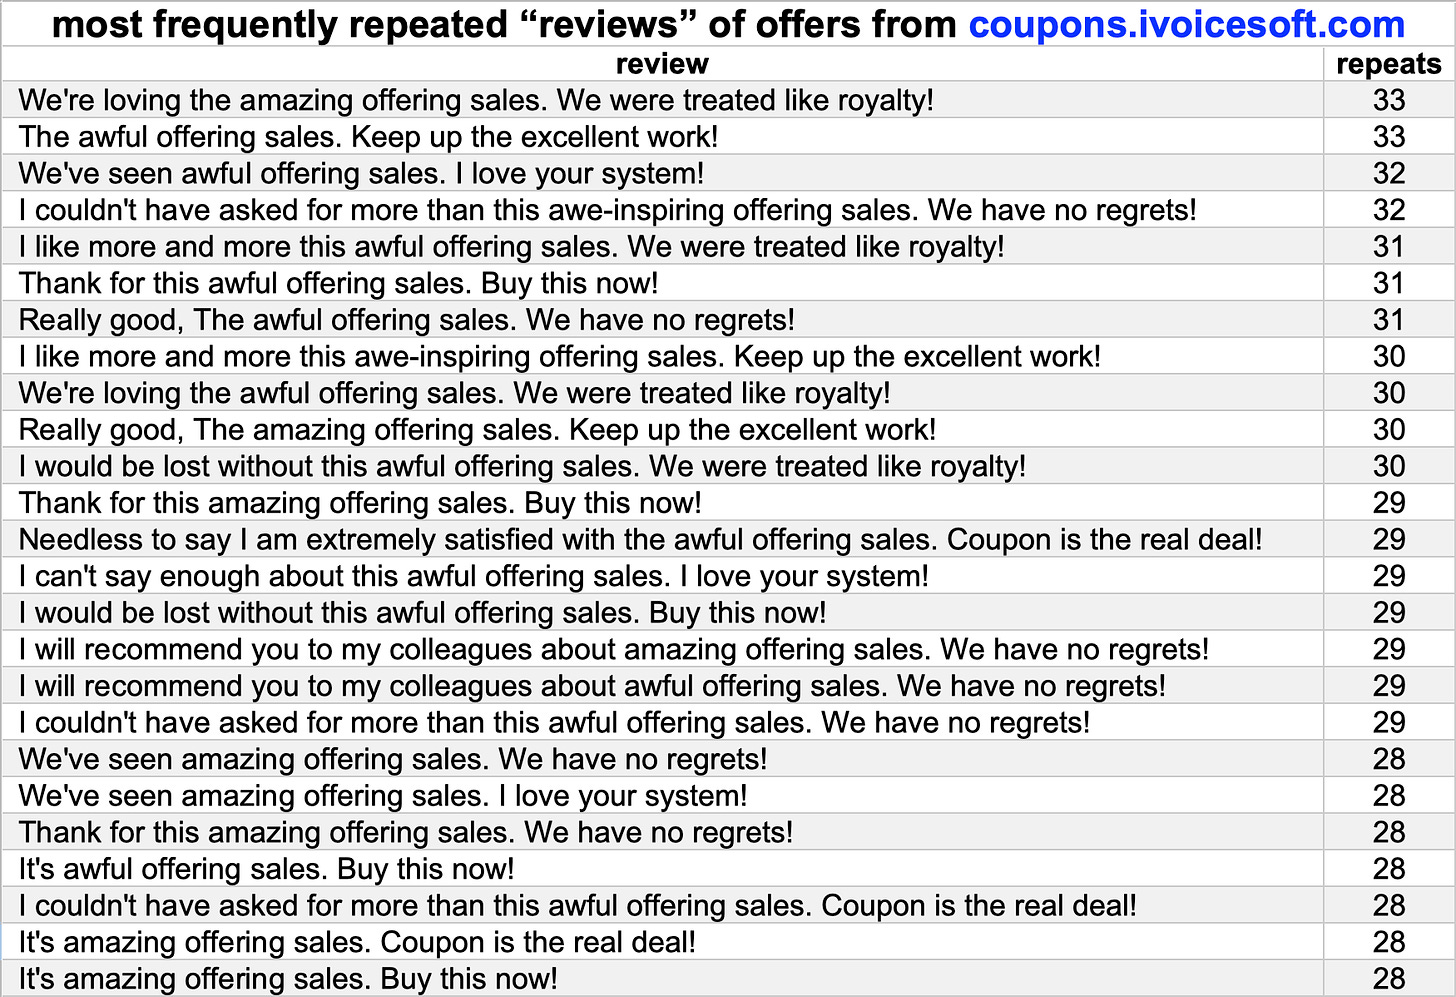 table of the most frequently repeated reviews on coupons.ivoicesoft.com